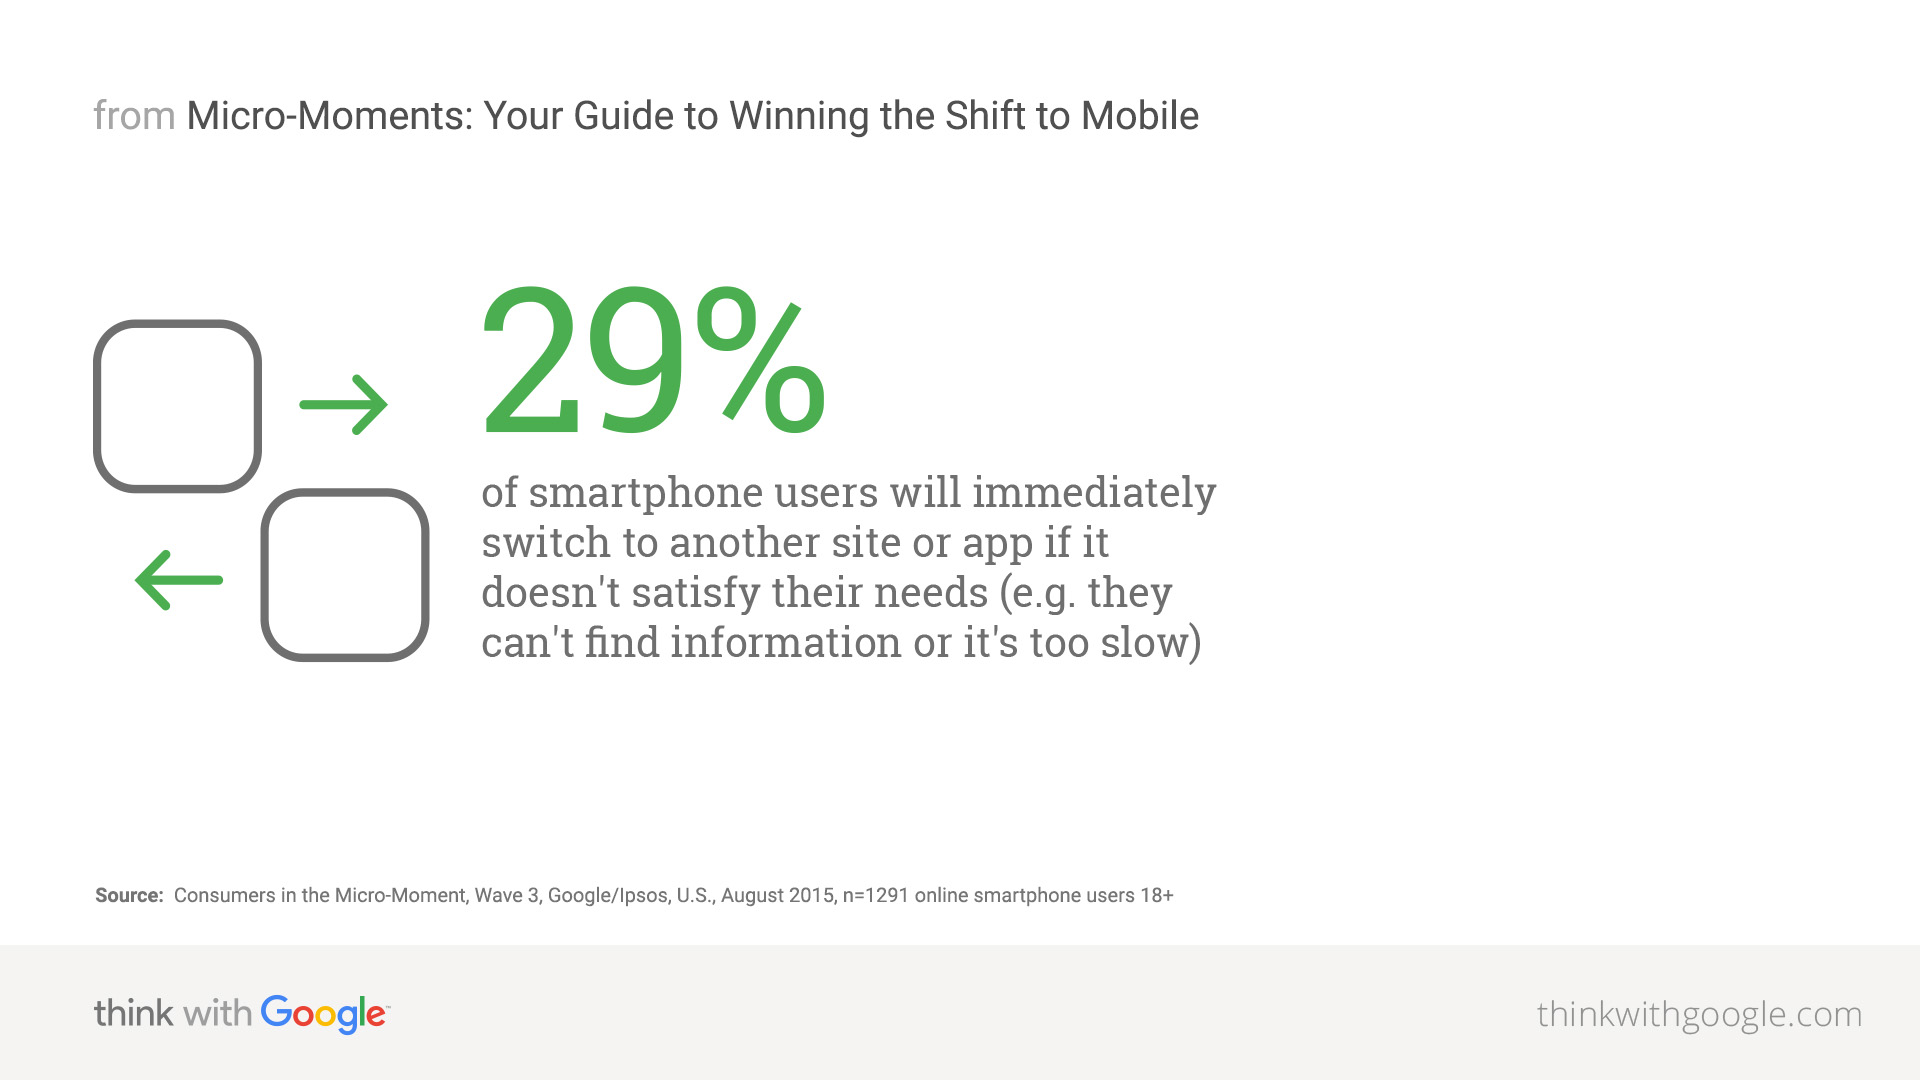 Speed is key: Optimize your mobile experience